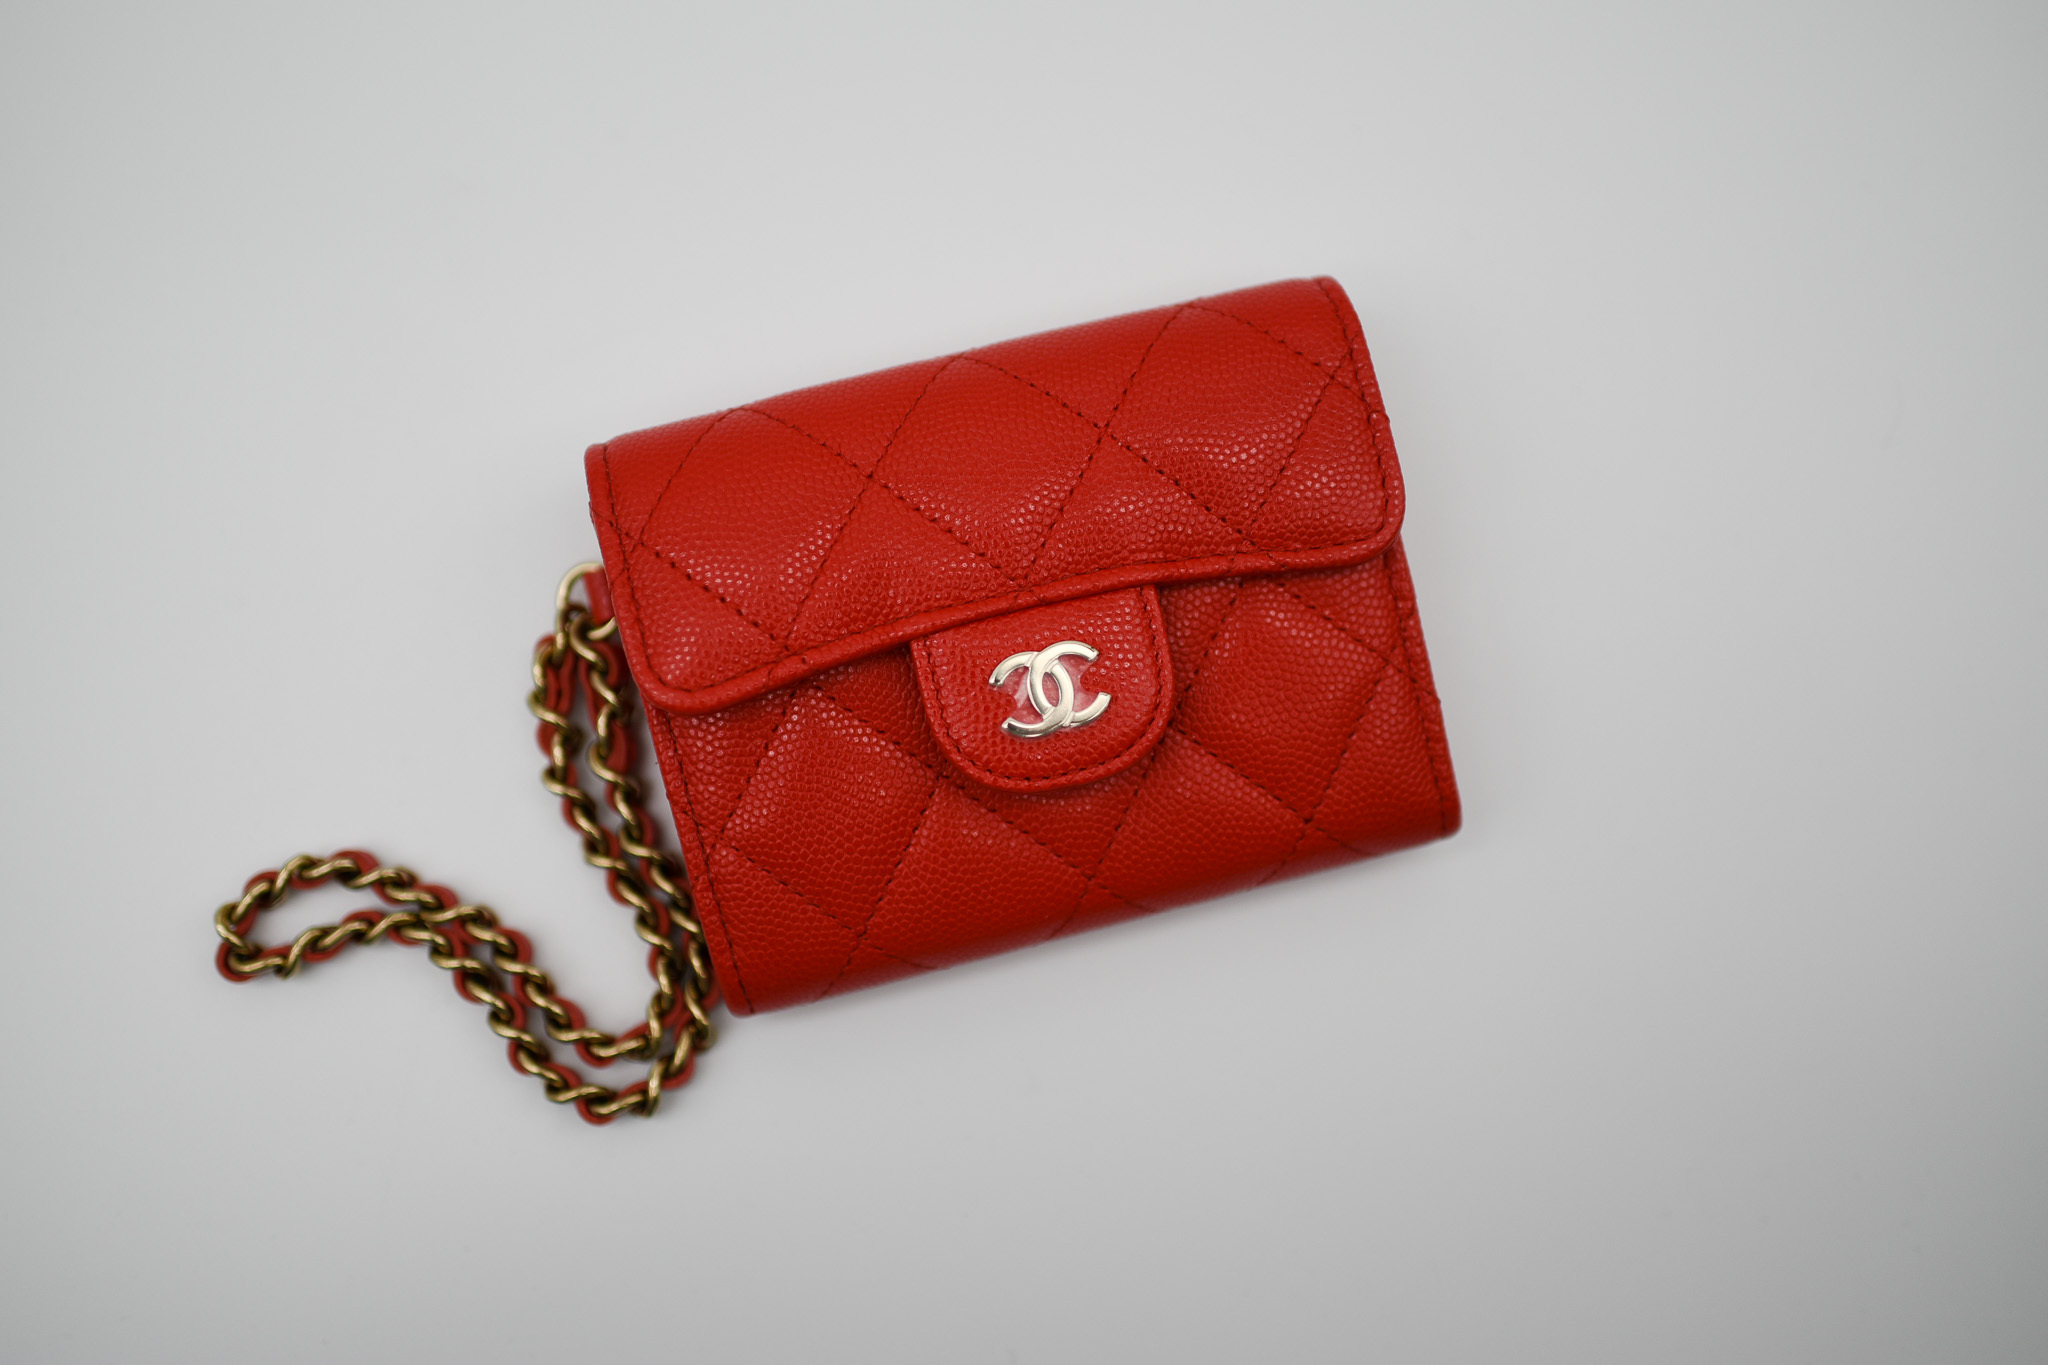 NEW 23S CHANEL Caviar Crystal Card Holder Red BIG CC STRASS Gold Wallet  $250 OFF